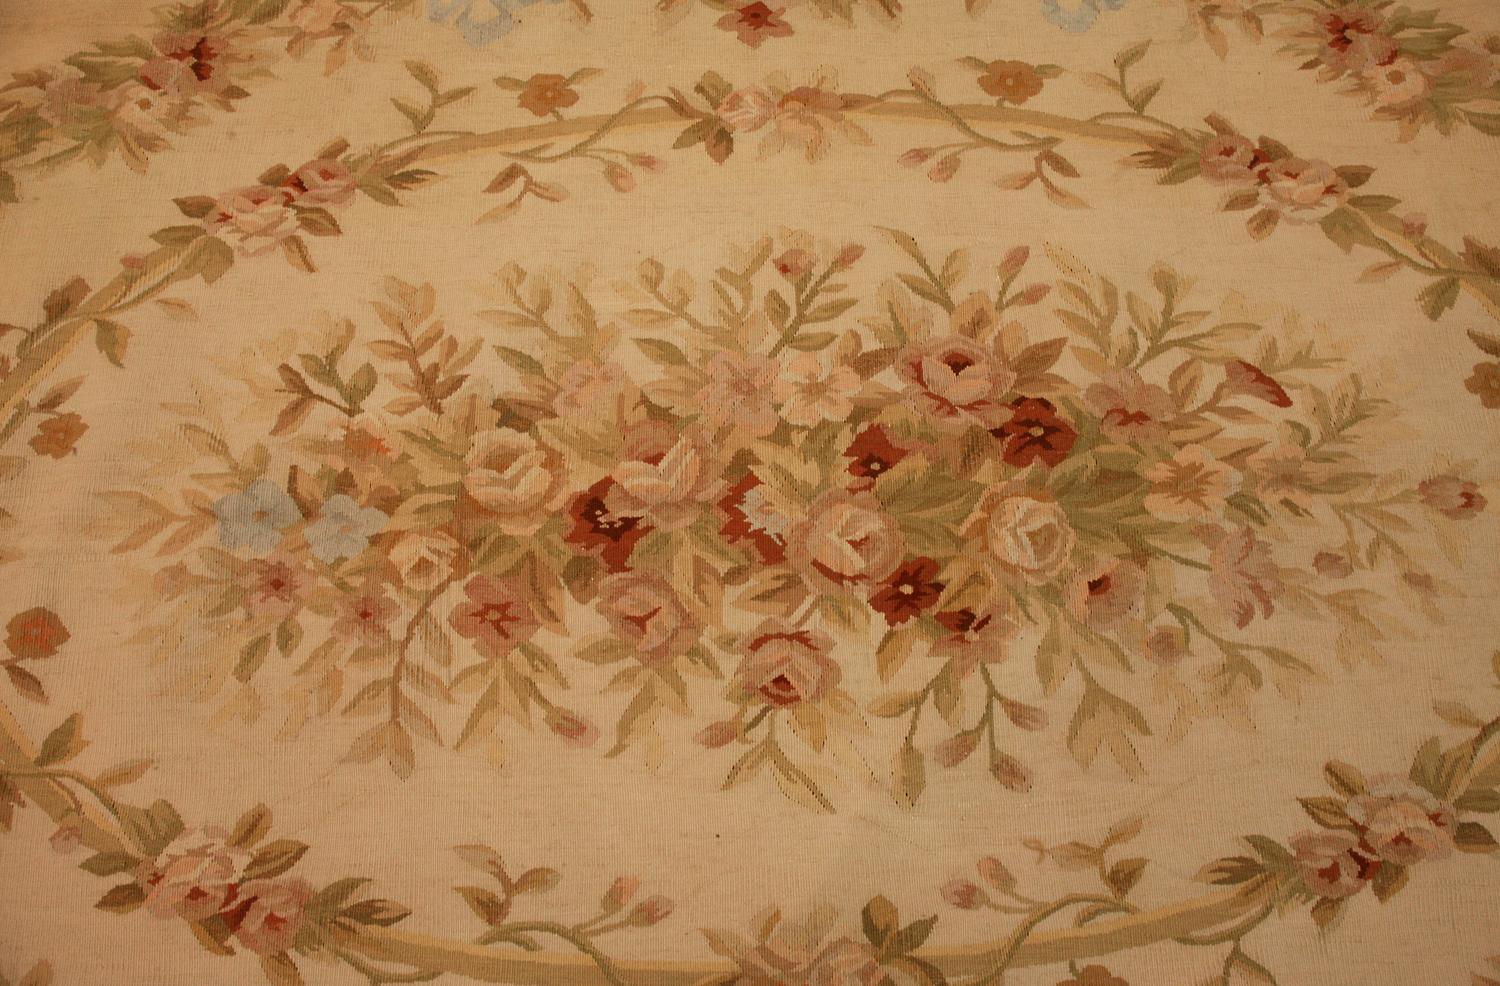 This Aubusson Chinese Flat-Weave Rug with Floral Design is a beautiful and timeless addition to your home. It features an intricate floral design in shades of cream, white, and ivory that will complement any decor. The soft, woolen fabric is woven